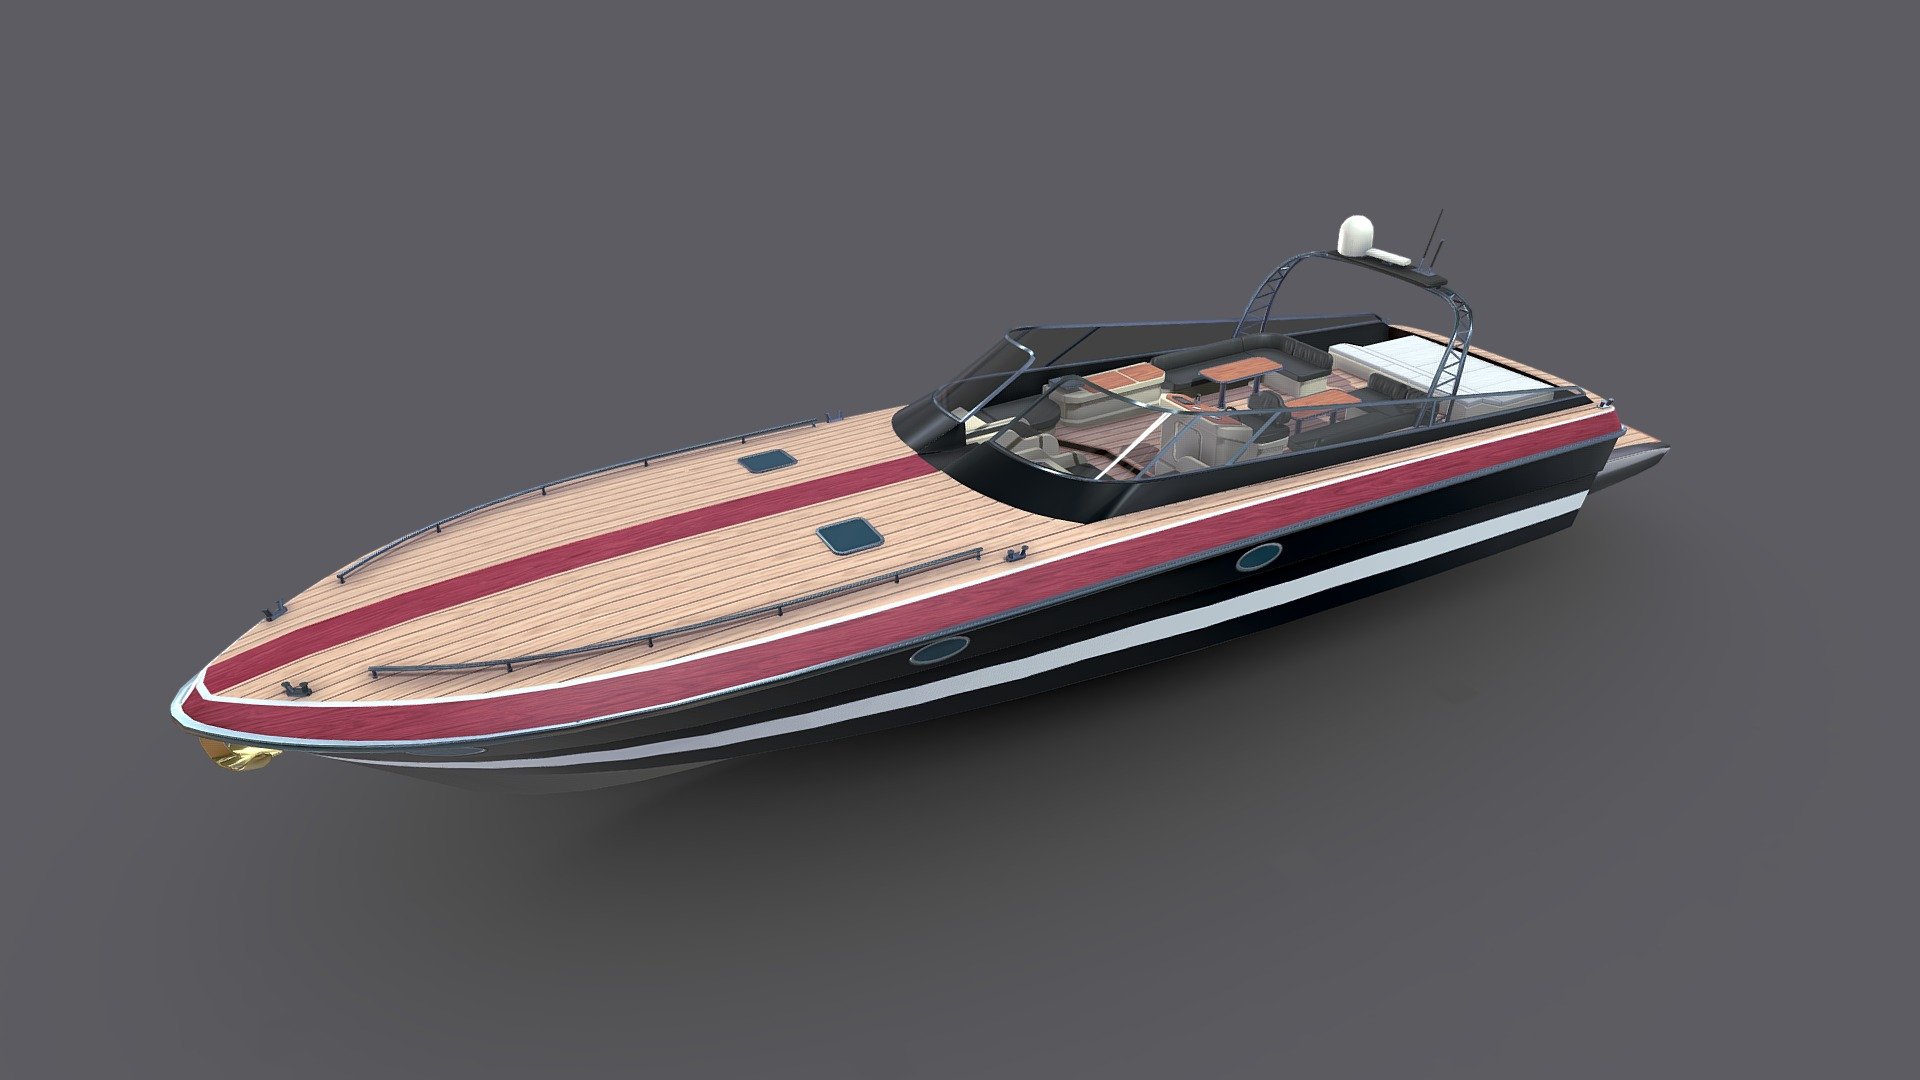 Luxury Boat




-Low-poly ready to use in Games, AR/VR (26884 Tris)

-Textures are in PNG format 4096x4096 PBR metalness 3 set.

-Files unit: Centimeters

-Available formats: MAX 2018 and 2015, OBJ, MTL, FBX, .tbscene.

-If you need any other file format you can always request it.

-All formats include materials and textures.
 - Luxury Boat PBR - Buy Royalty Free 3D model by MaX3Dd 3d model